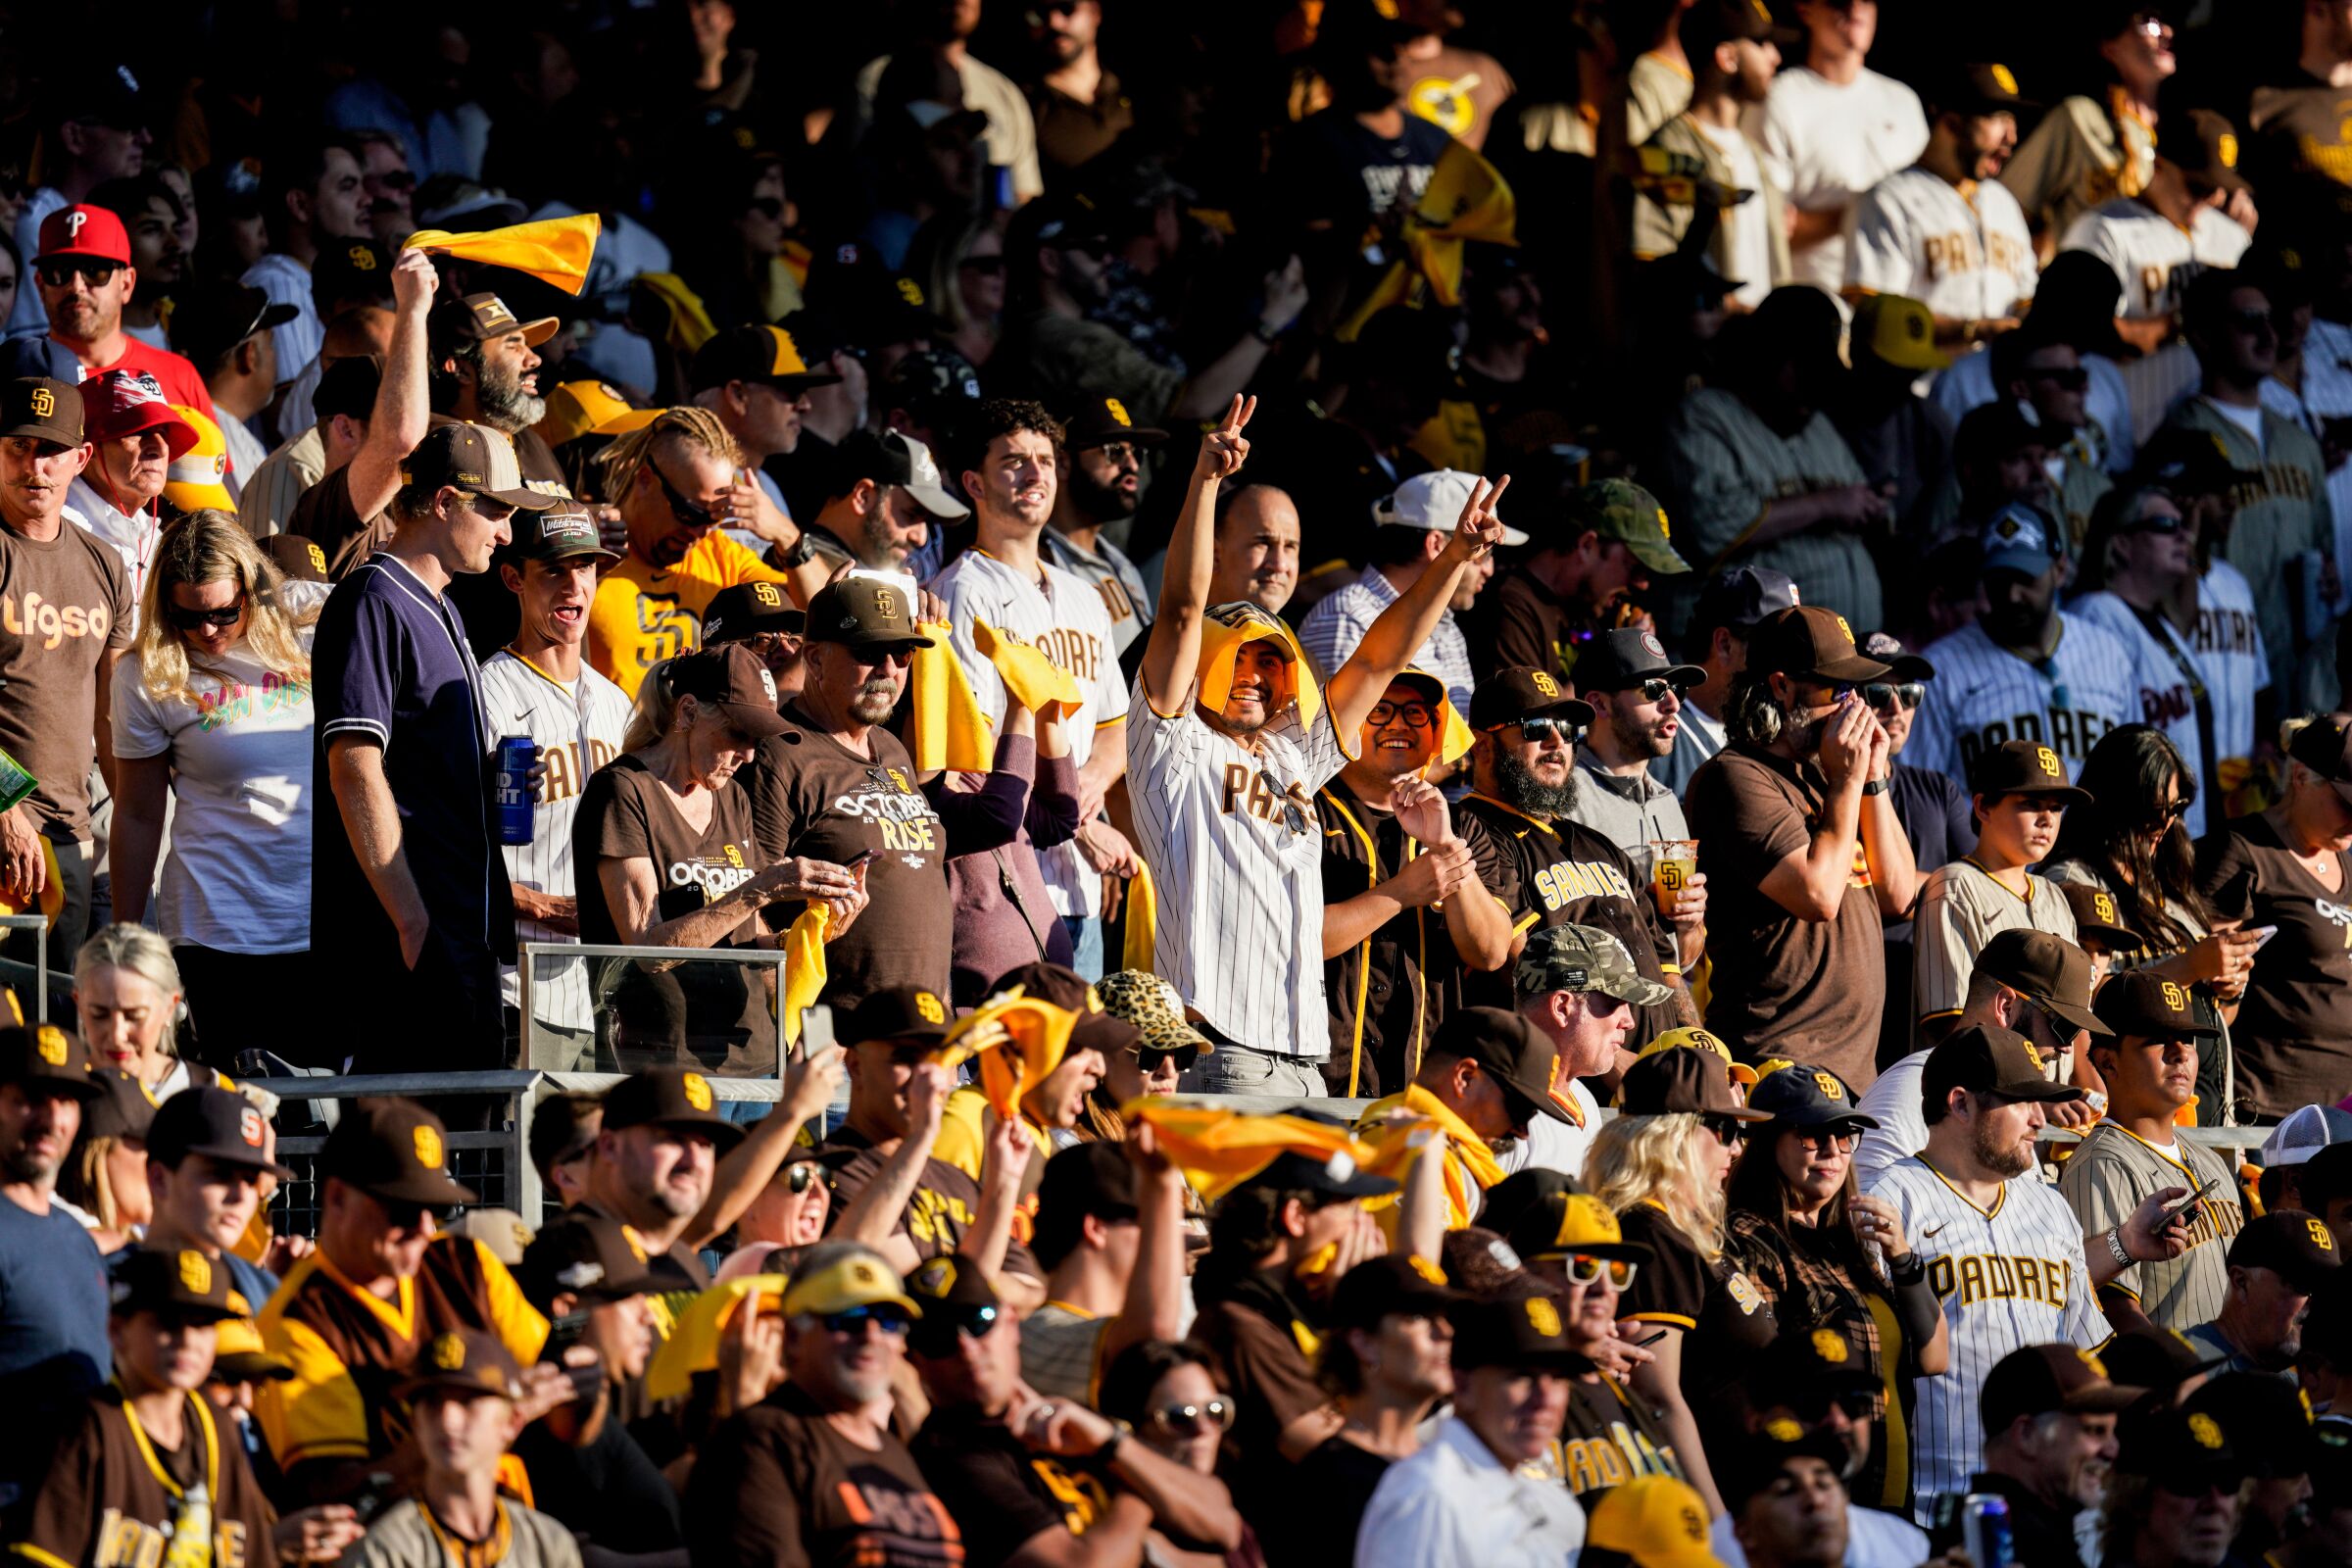 Padres fans cheer at the beginning of Game 1 of the NLCS at Petco Park on Tuesday, Oct. 18, 2022 in San Diego, CA.